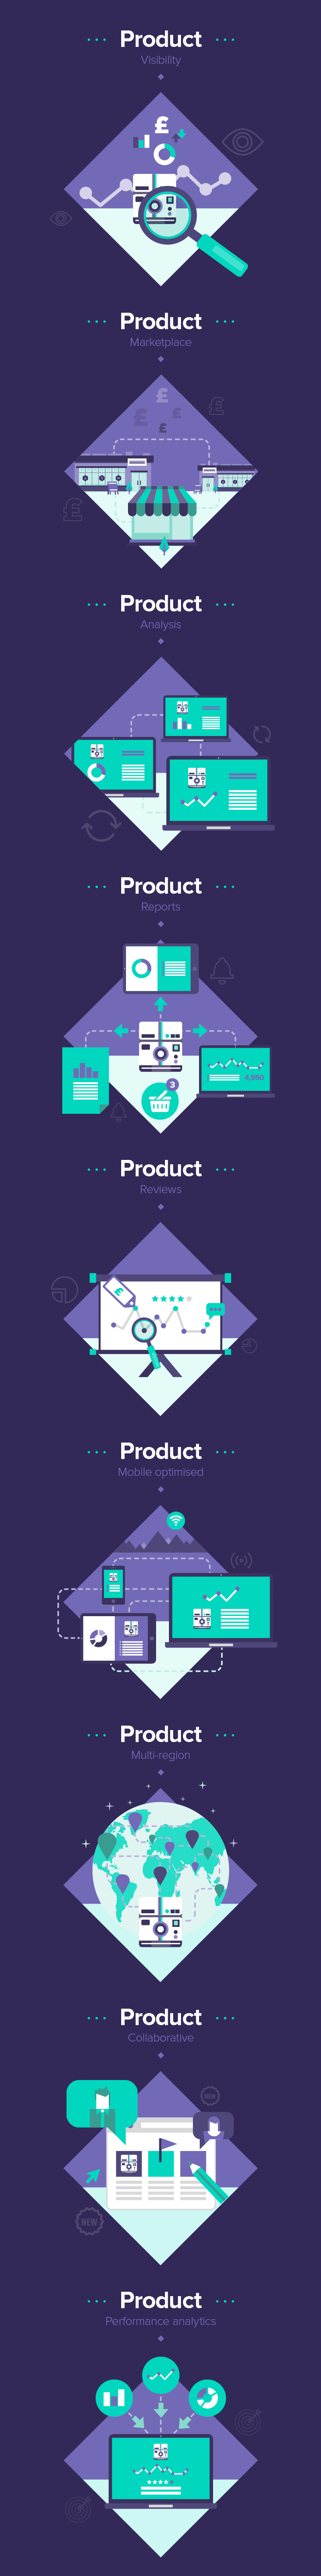 app purple green mac icons Icon flat flat design mobile grid Layout Responsive UI ux color